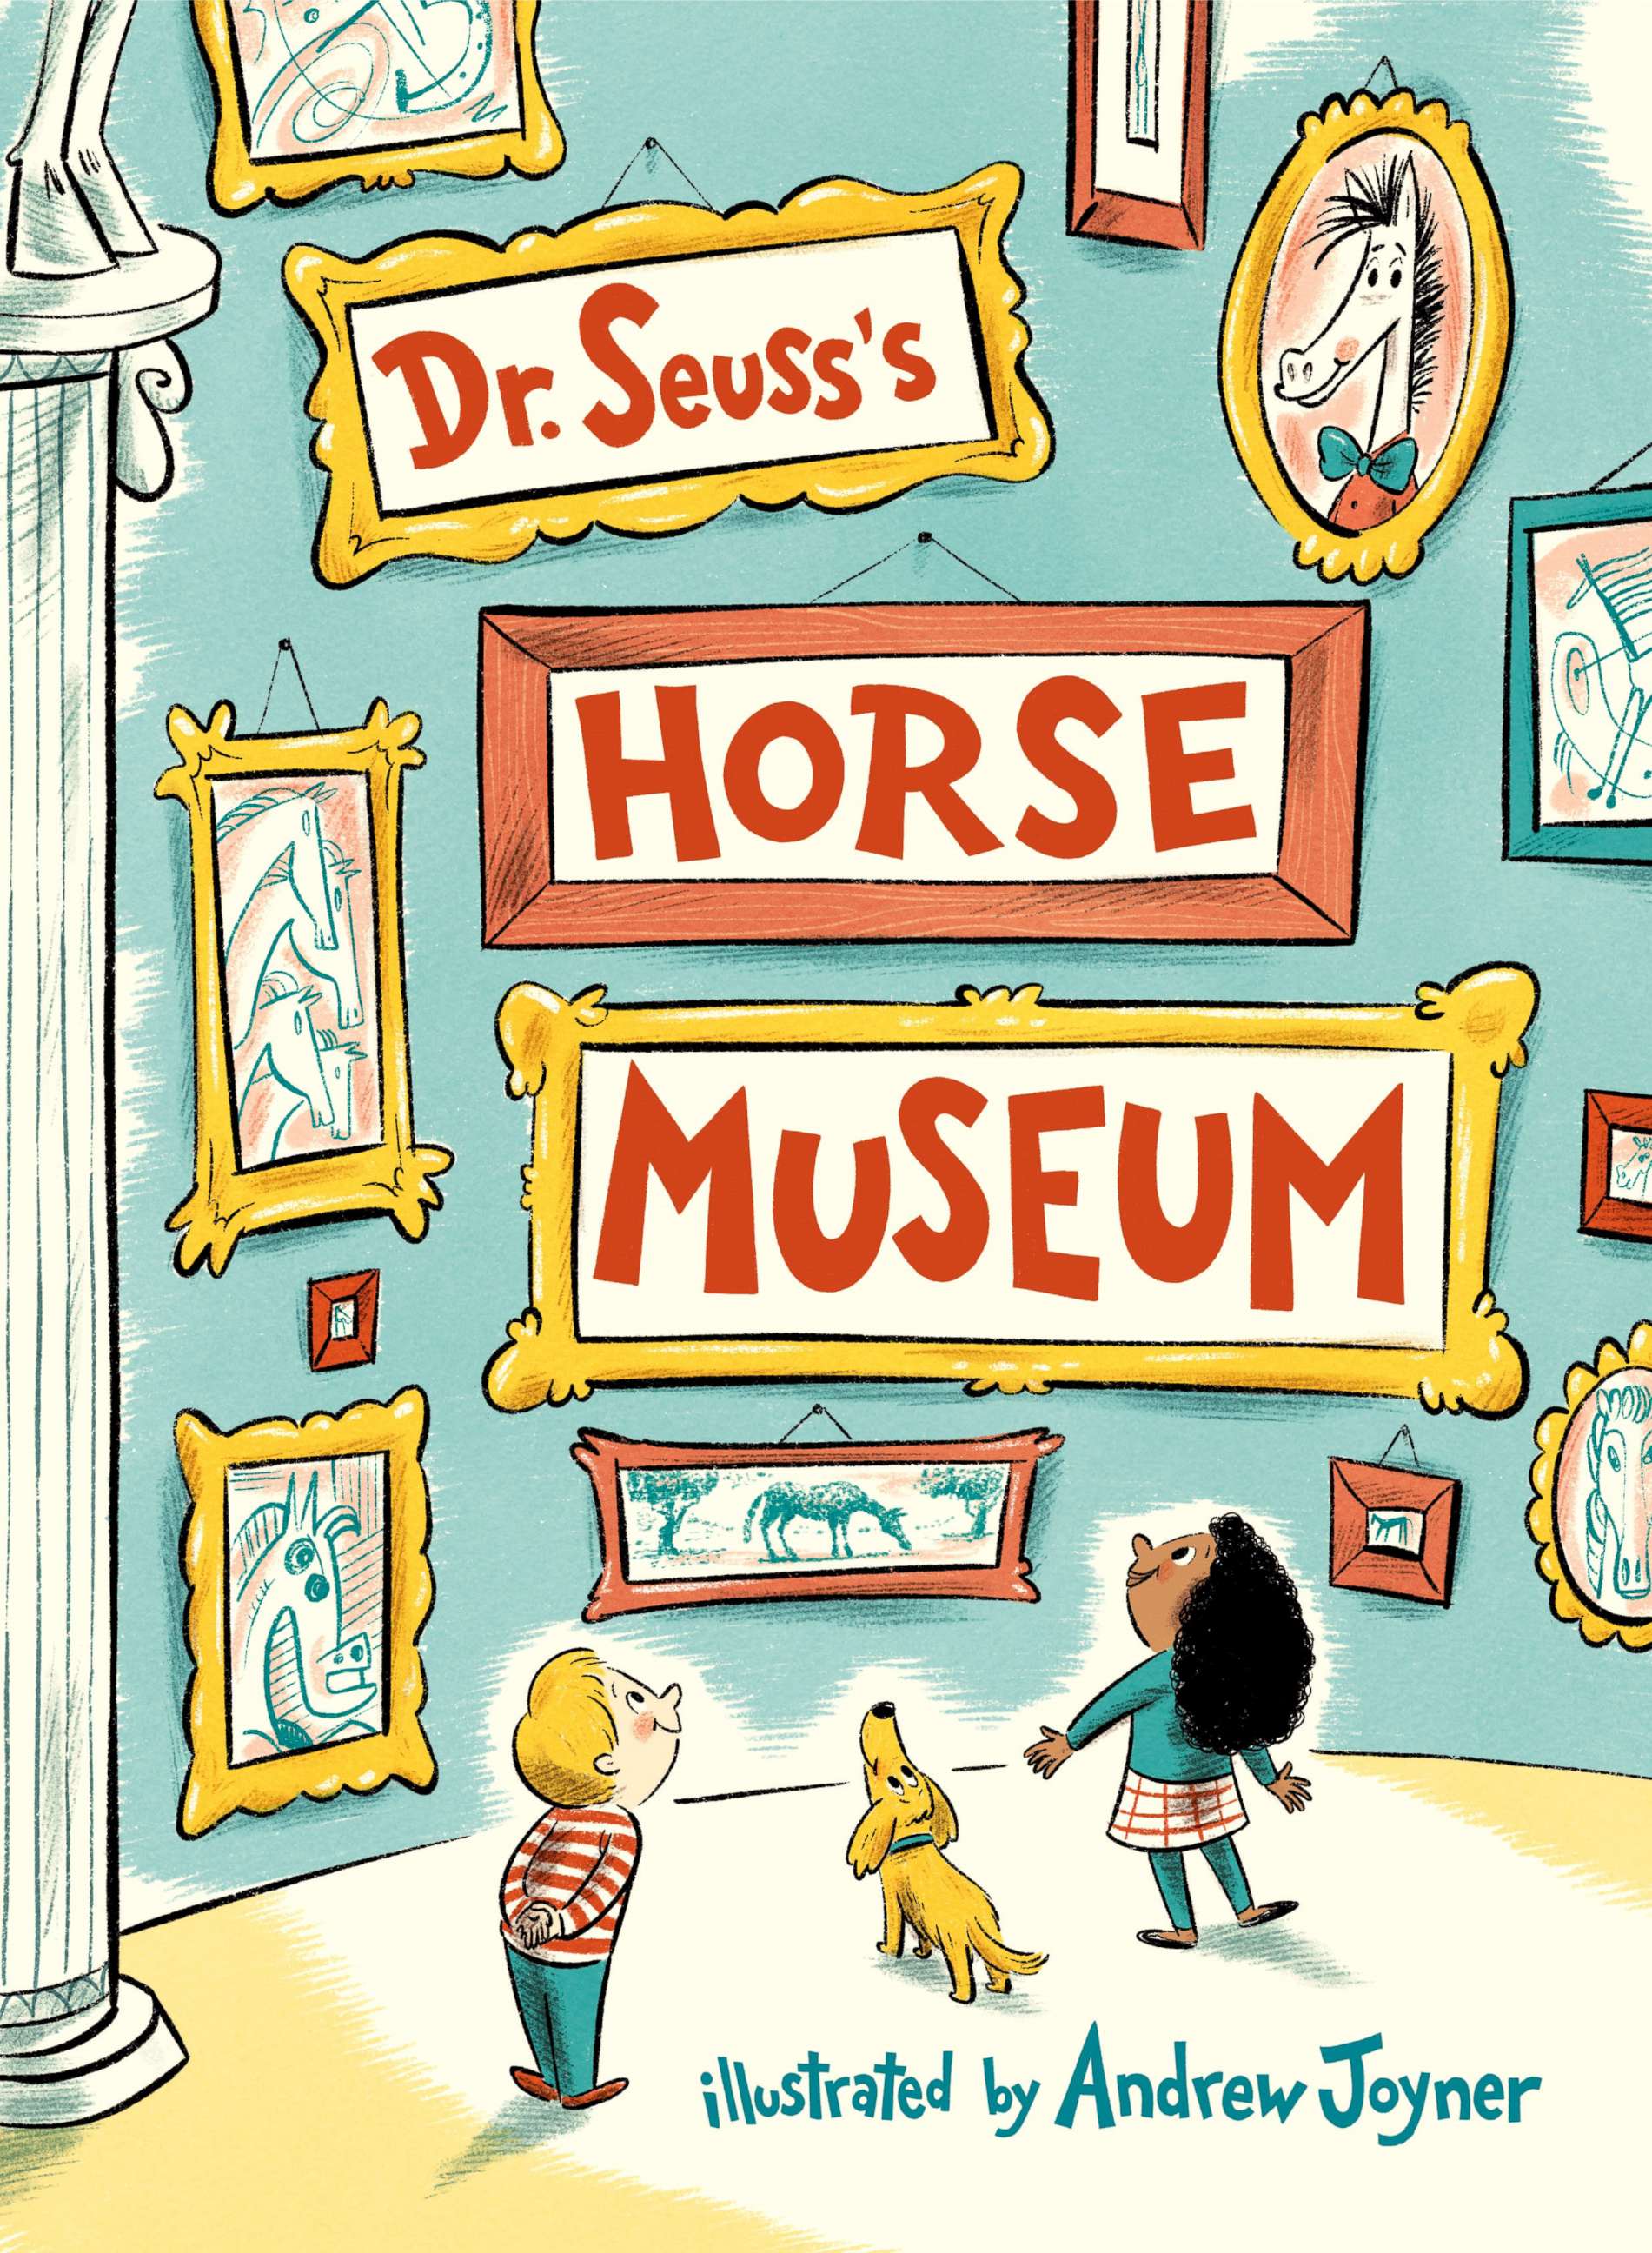 PHOTO: Legendary children's writer Dr. Seuss will be out with a new book this fall, "Horse Museum."